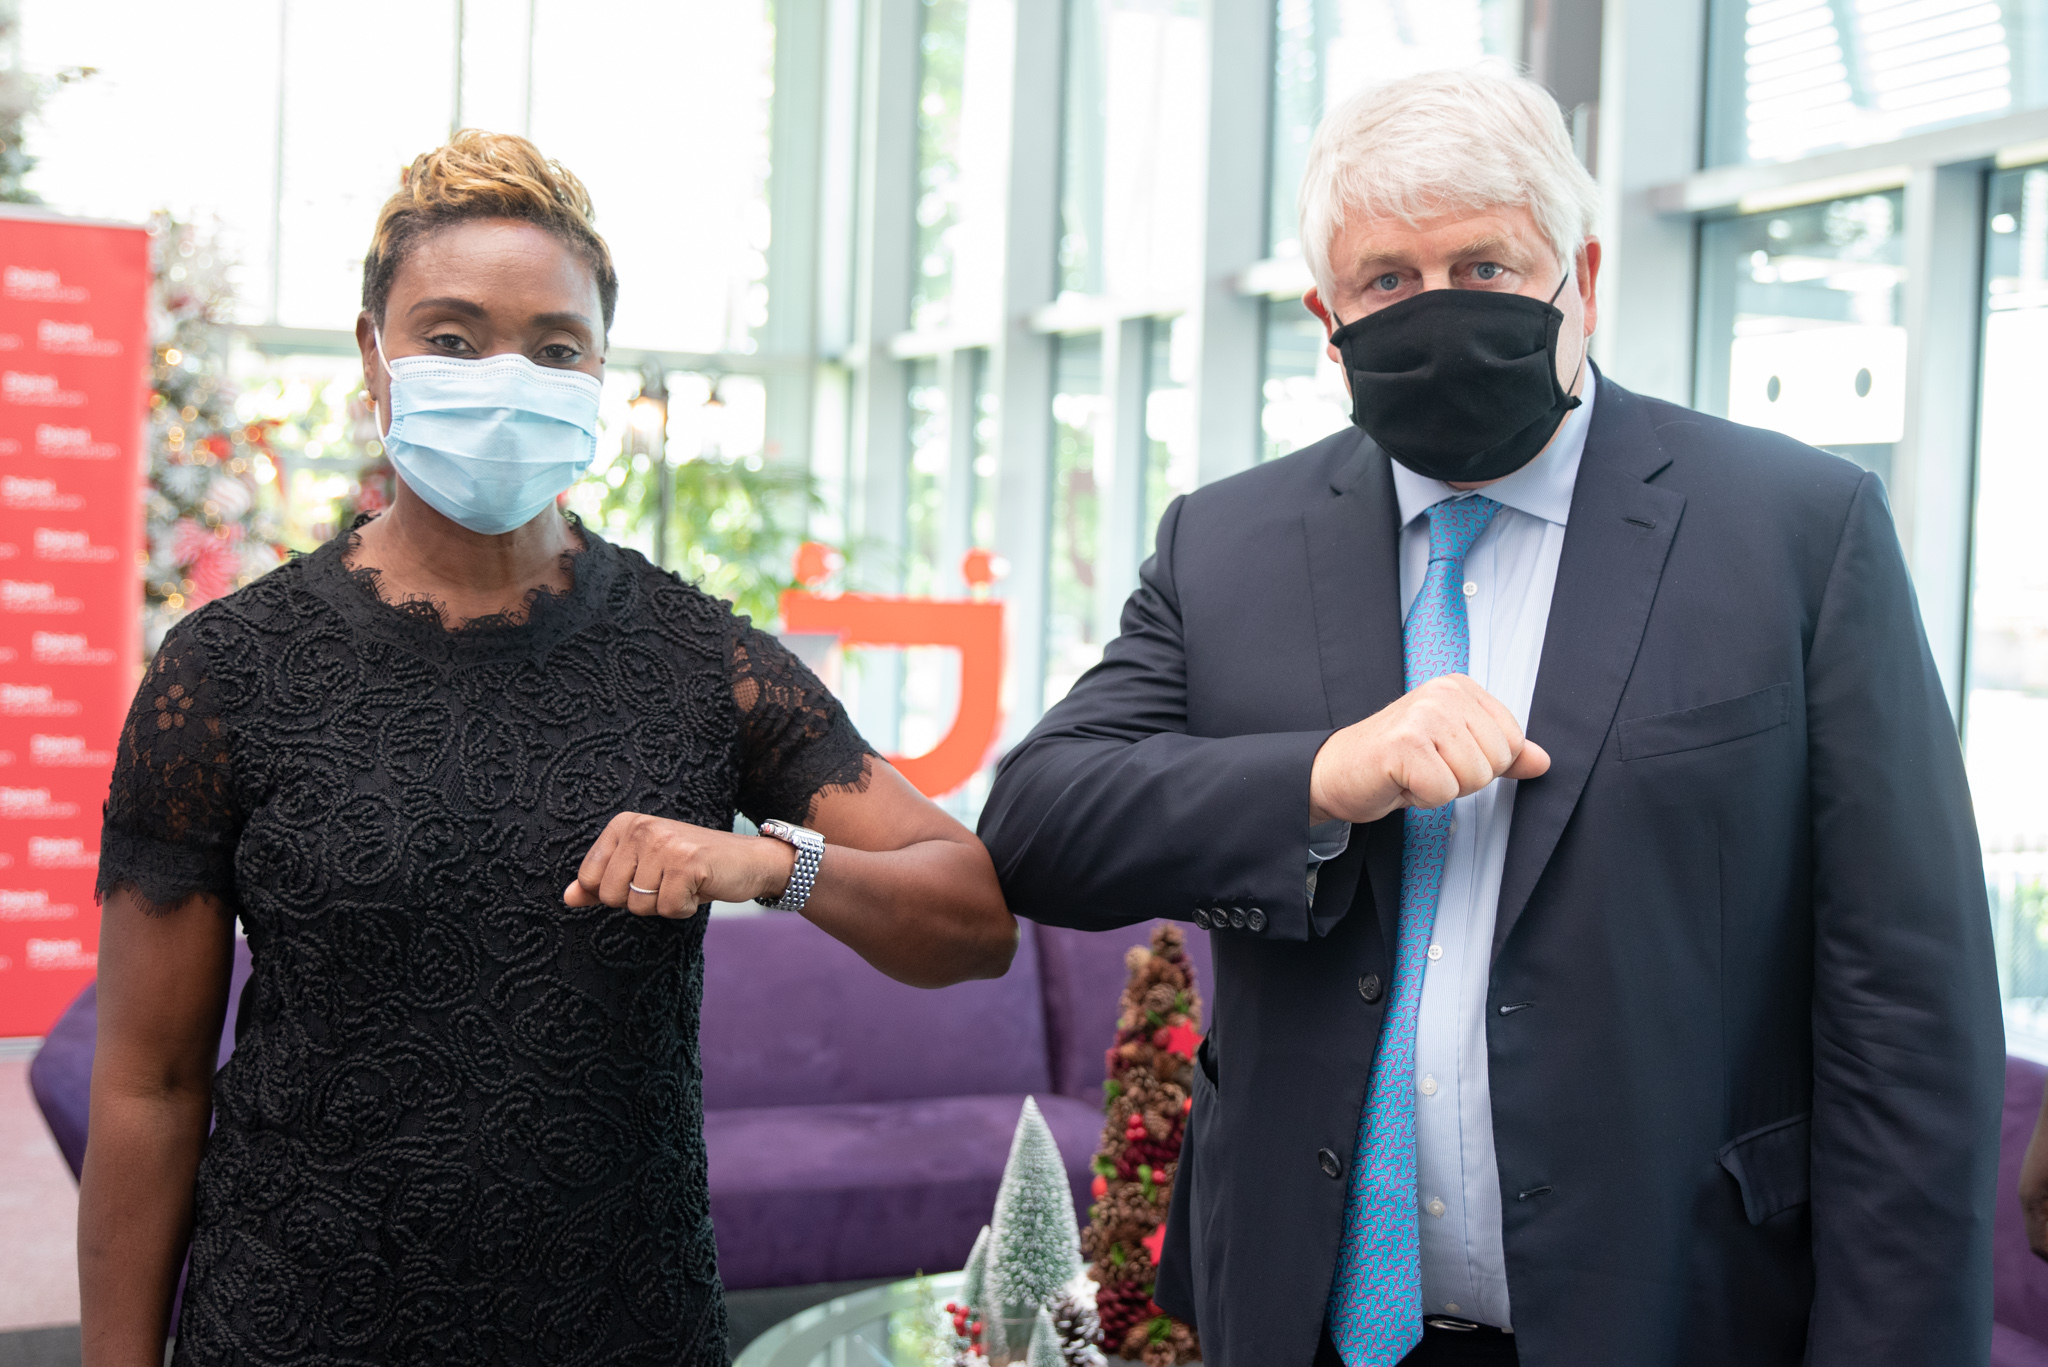 Denis O'Brien at The University Hospital of the West Indies